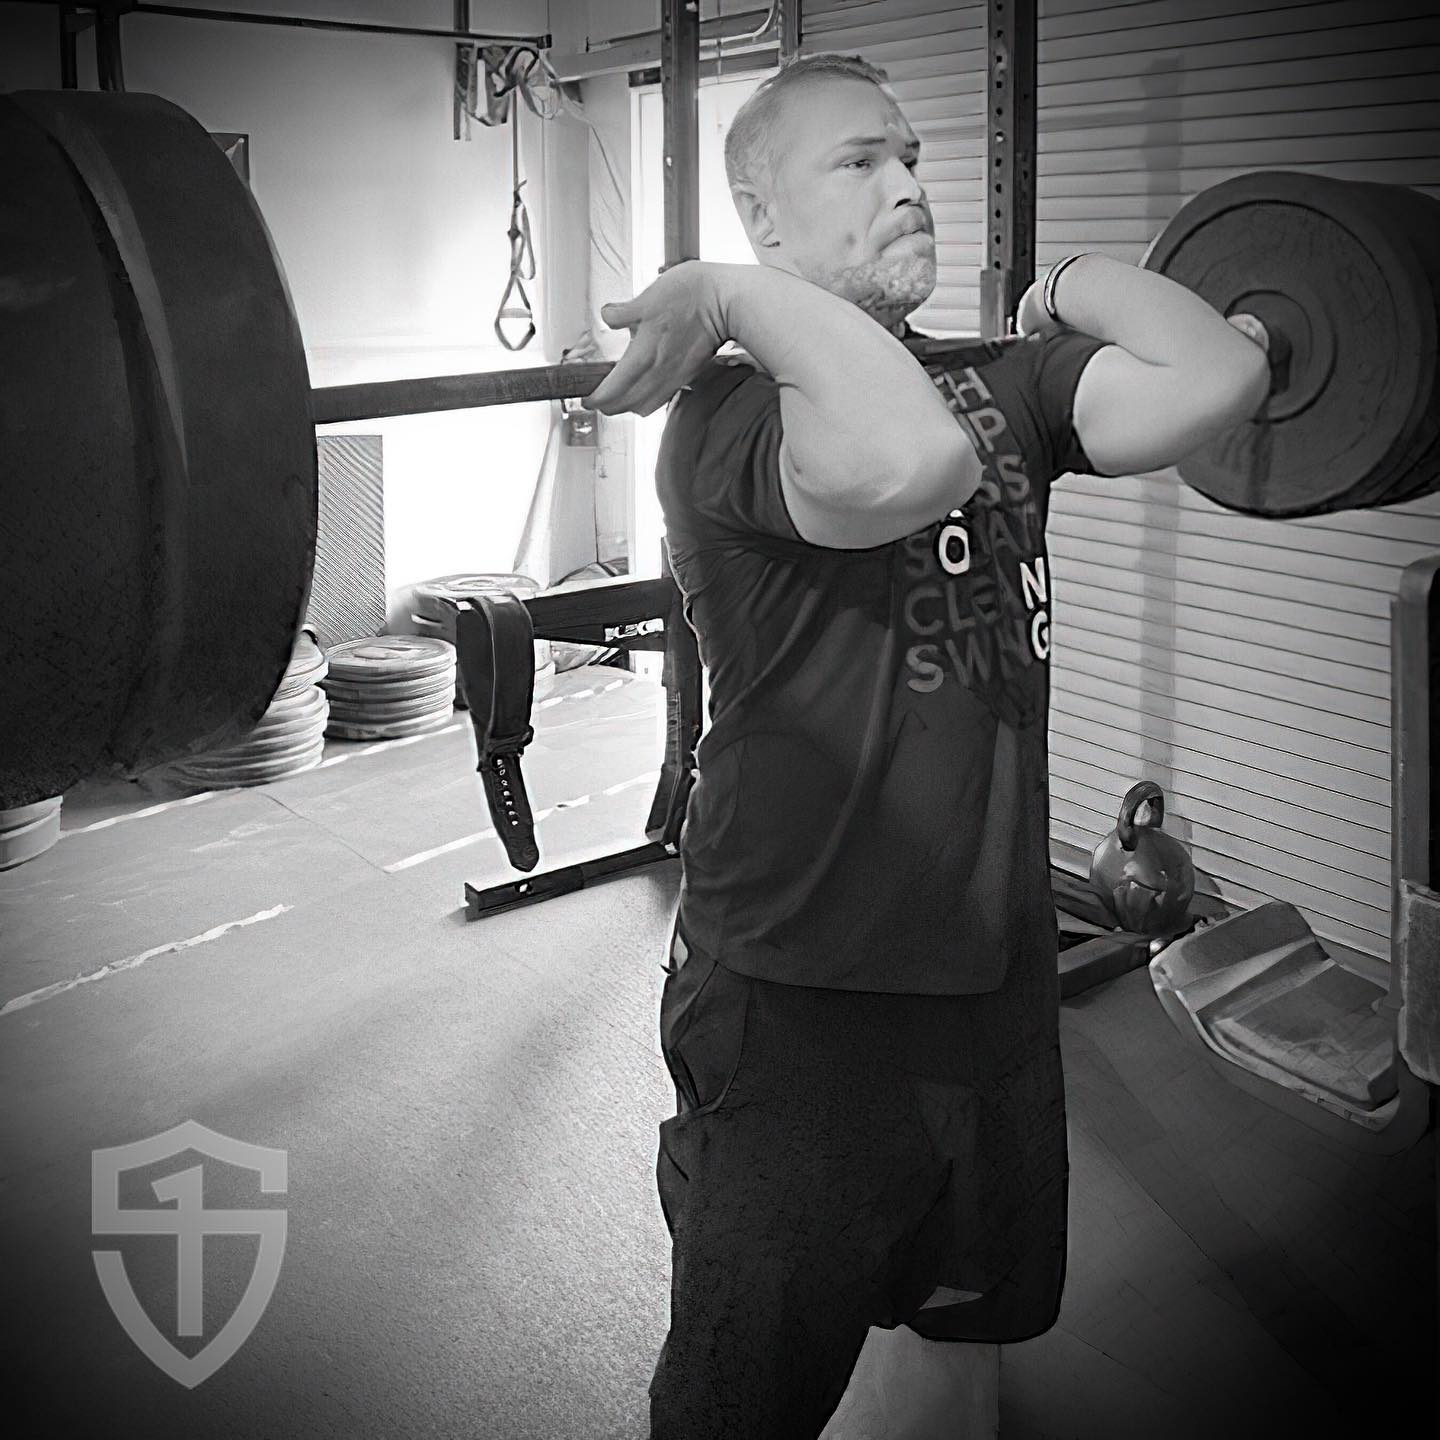 [TUTORIAL] Mobility for a Stronger Olympic Barbell Front Rack

>>> strongfirst.com/blog or CLICK THE LINK IN THE BIO!

When considering which front rack to choose, your current mobility can be a determining factor in choosing your ideal front squat. 

In this article, we will discuss the three front rack styles and then focus on mobility training for the Olympic style. This style, although the strongest, is the hardest to achieve. 

Simply knowing the difference between these front rack positions is not enough if mobility limits your choice.

–Jeremy Layport @j_layport , StrongFirst Certified Master Instructor, StrongFirst Elite

---

StrongFirst O-Lifting 

>>> Padova, Italy, Europe, September 17-18, 2022 >>> LINK IN THE BIO! 

Attendees will learn:

1. Mobility assessments and improvement strategies for wrists, shoulders, thoracic spine, hips, knees, and ankles

2. Foundational barbell lift positions on which Olympic-style lifts are built:

–Front Squat
–Overhead Squat
–Military Press
–Romanian Deadlifts (RDL)
–Push Press

3. Olympic-style lifts:
–Hang Clean/Snatch
–Muscle Clean/Snatch
–Clean/Snatch Pull
–Power Clean/Snatch

Why Attend?

For the garage gym minimalist—increase your training options with new barbell skills. 

For the athlete or strength coach—build your athletes with quick lifts. 

For the barbell strength athlete—learn the lifts that train your ability to fire faster, and relax faster, exactly what you need to go from good to great. T

For the kettlebell specialist—upskill your strength, explosiveness, and power with a new tool. 

Sign up today and power to you!

>>> O-Lifting — Padova, Italy, Europe, September 17-18, 2022 >>> LINK IN THE BIO! 

––

#strongfirst #sfl #olifting #olympiclifting #sflrocks #bestrongfirst